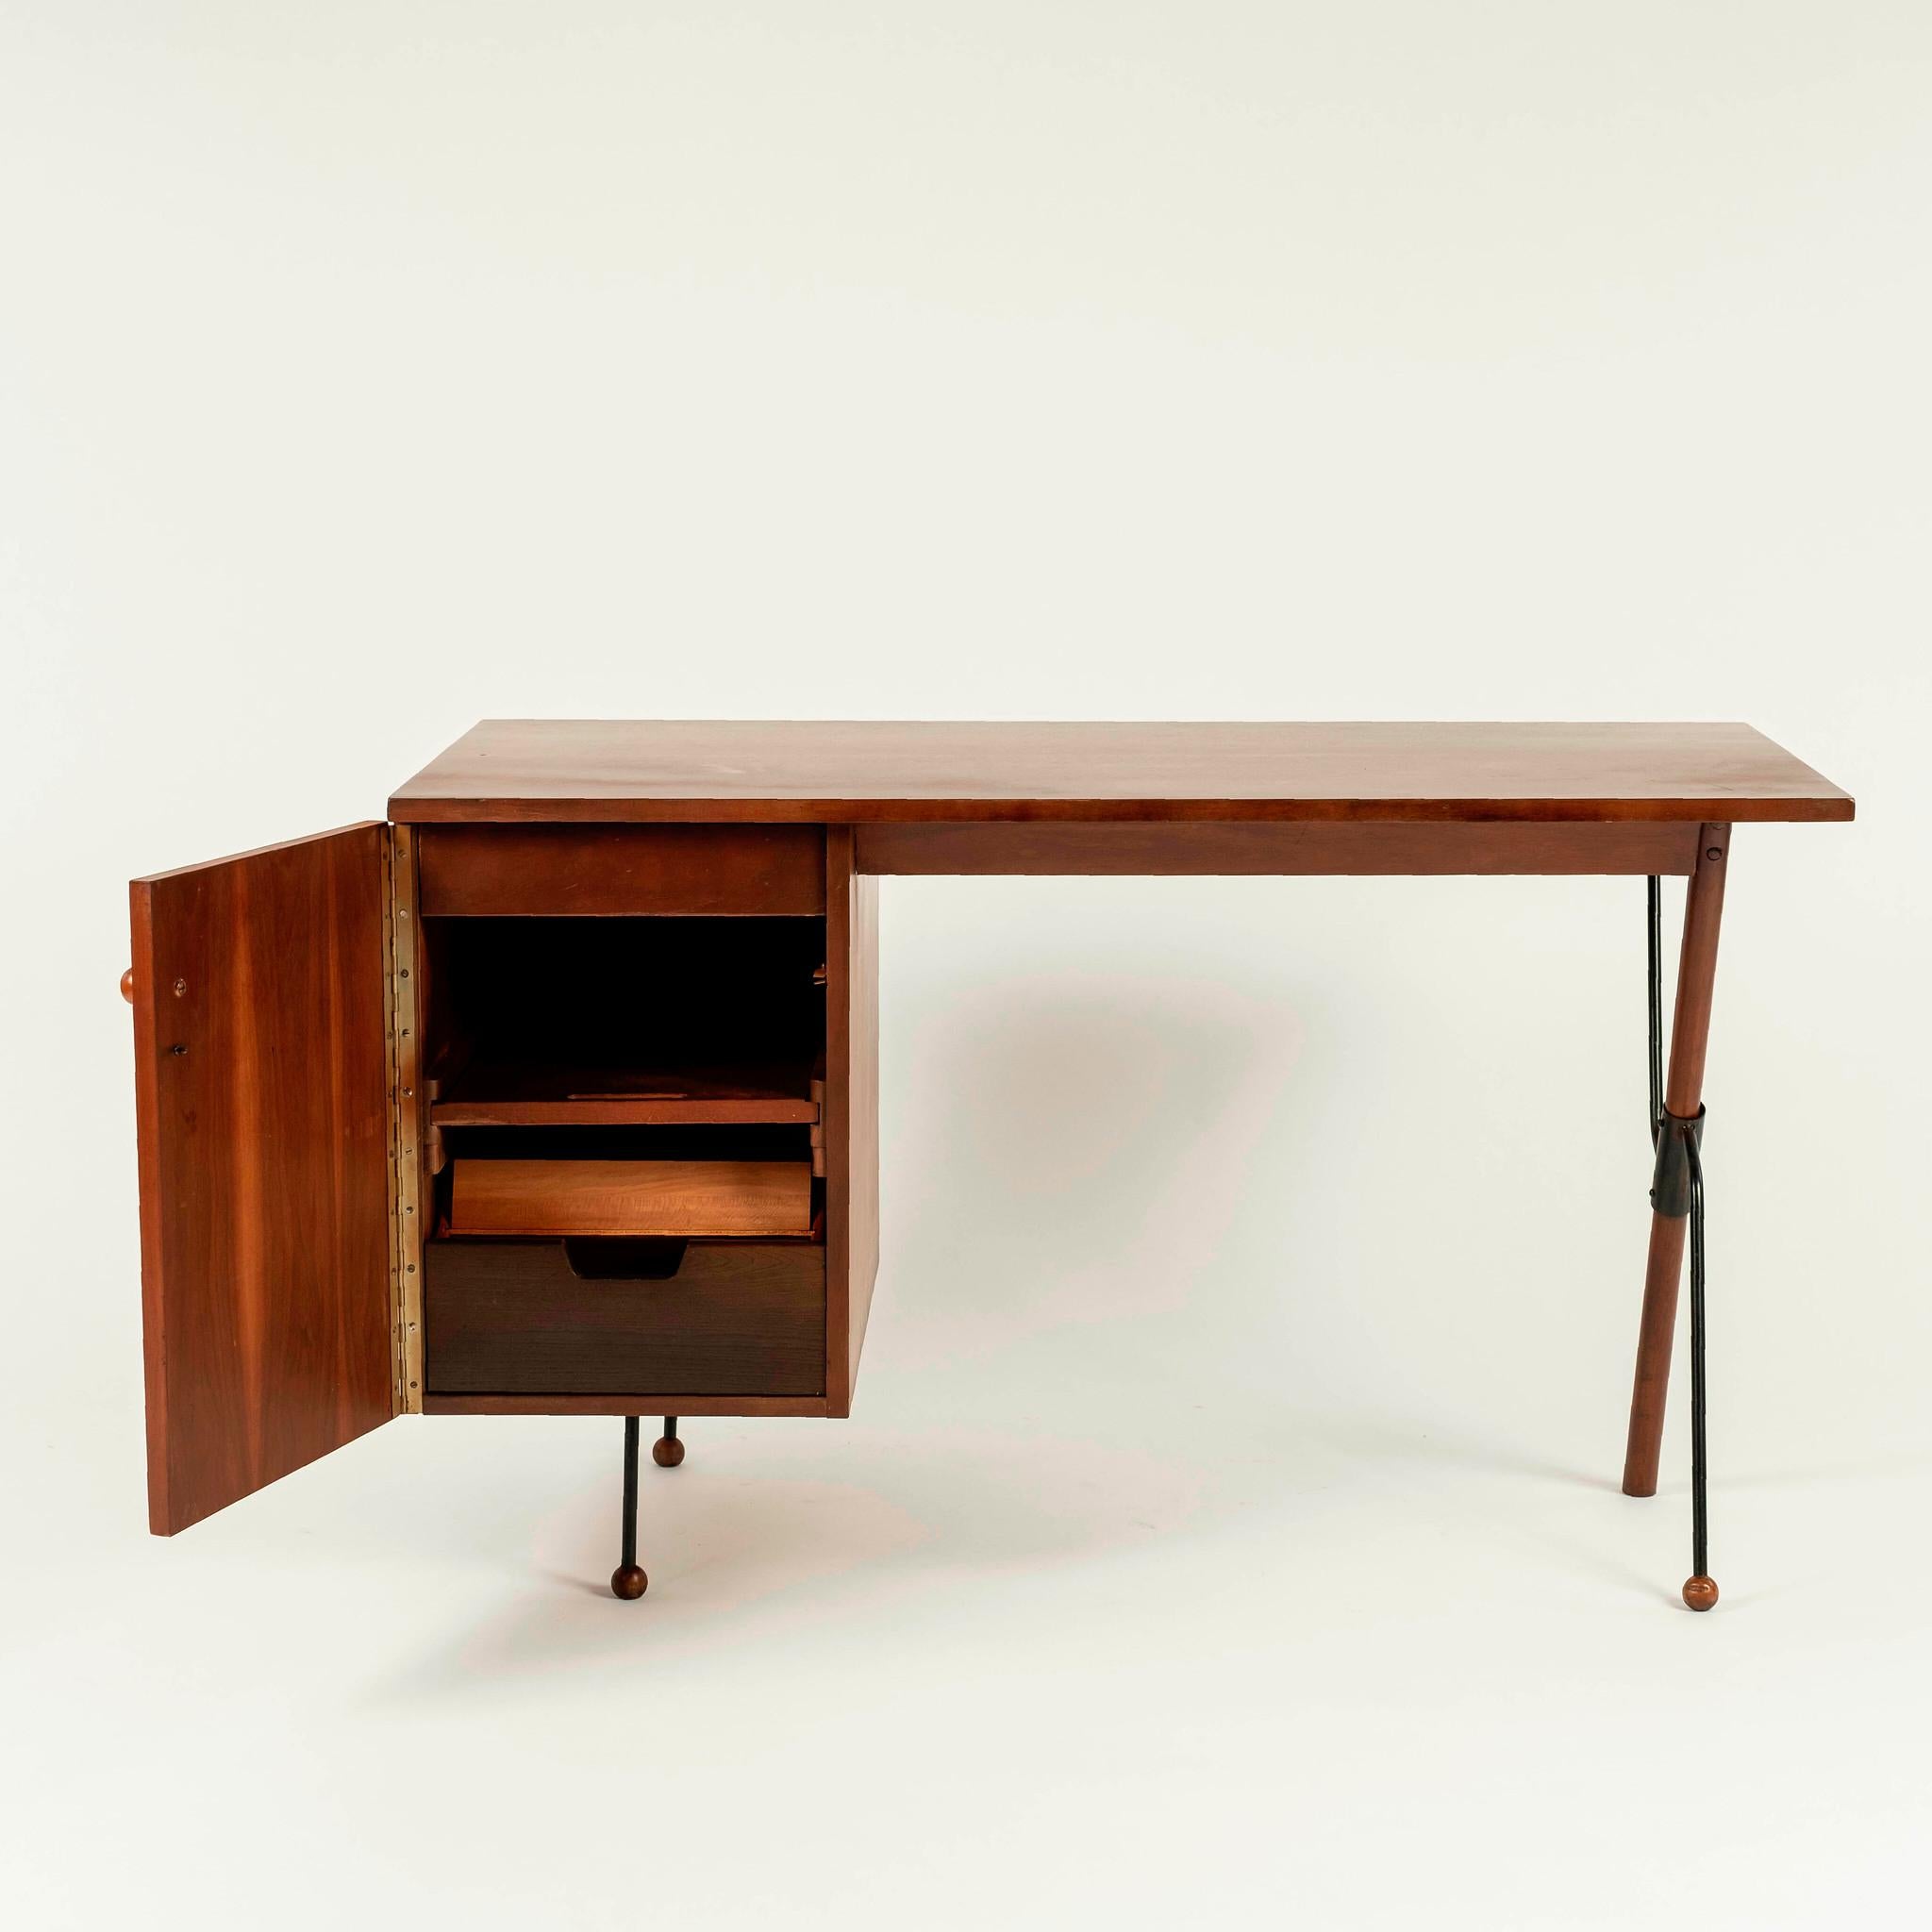 Modernist maple and patinated steel desk featuring two drawers behind a single hinged door with ball final feet and knob.